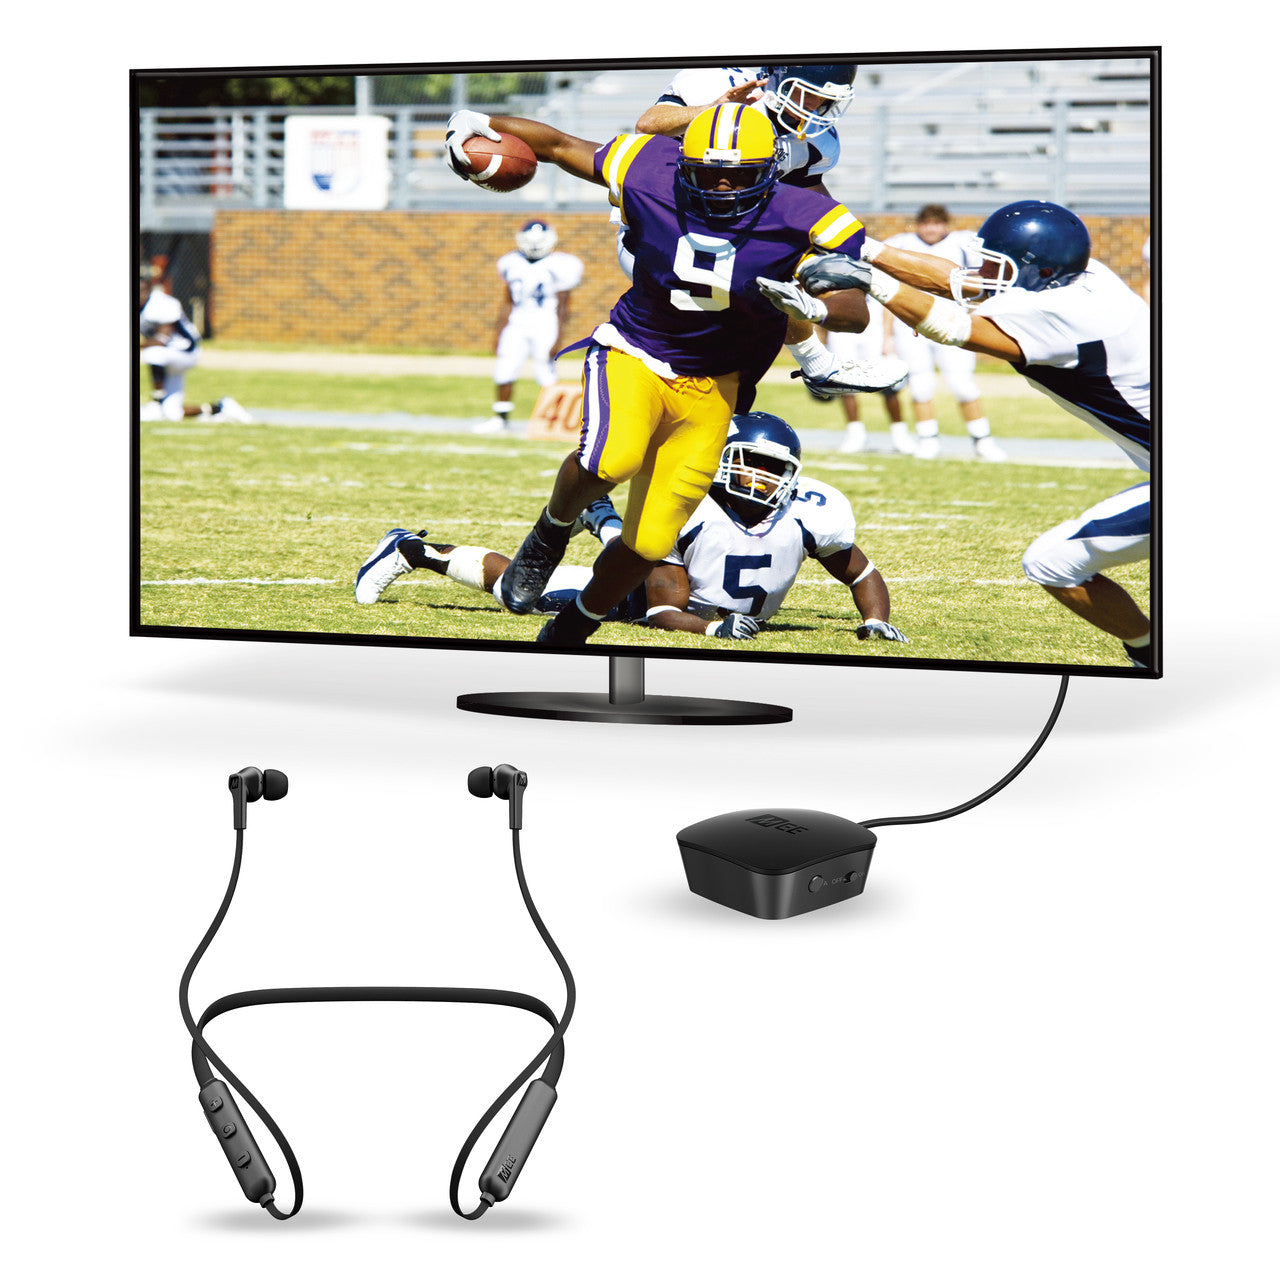 Image of Connect T1N1 Wireless Headphone System for TV - Includes Bluetooth Transmitter and Neckband Headphones.